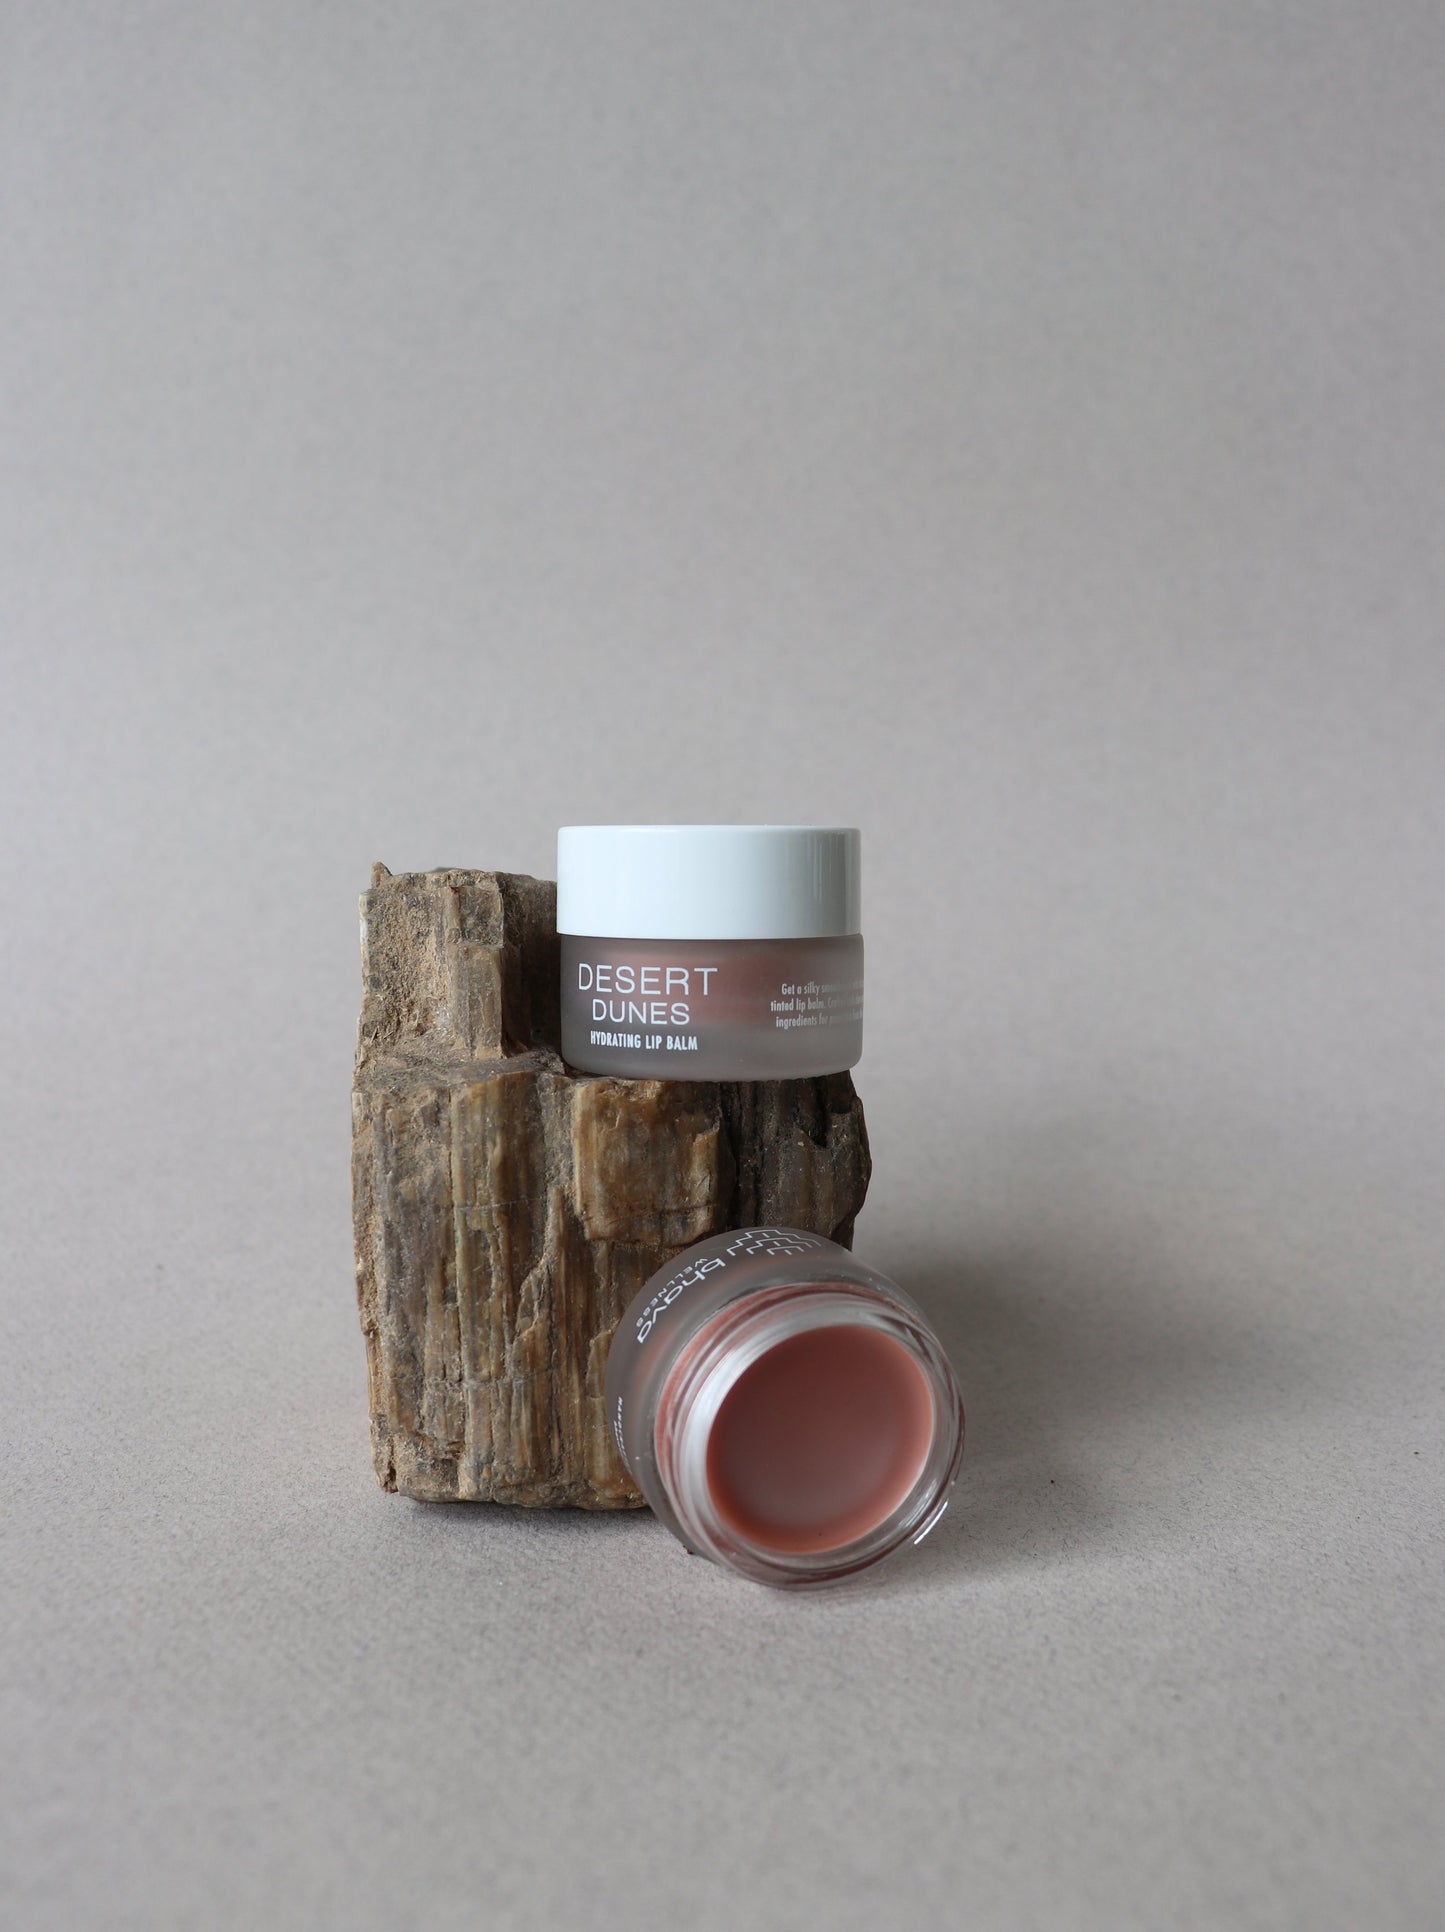 Get a silky smooth look with this naturally tinted lip balm. Tint is minimal because we wanted to create something that is unisex but that pays homage to our beautiful desert surroundings. Long lasting hydration due to the moisturizing nature of the carefully selected herbs. Made with all organic ingredients.